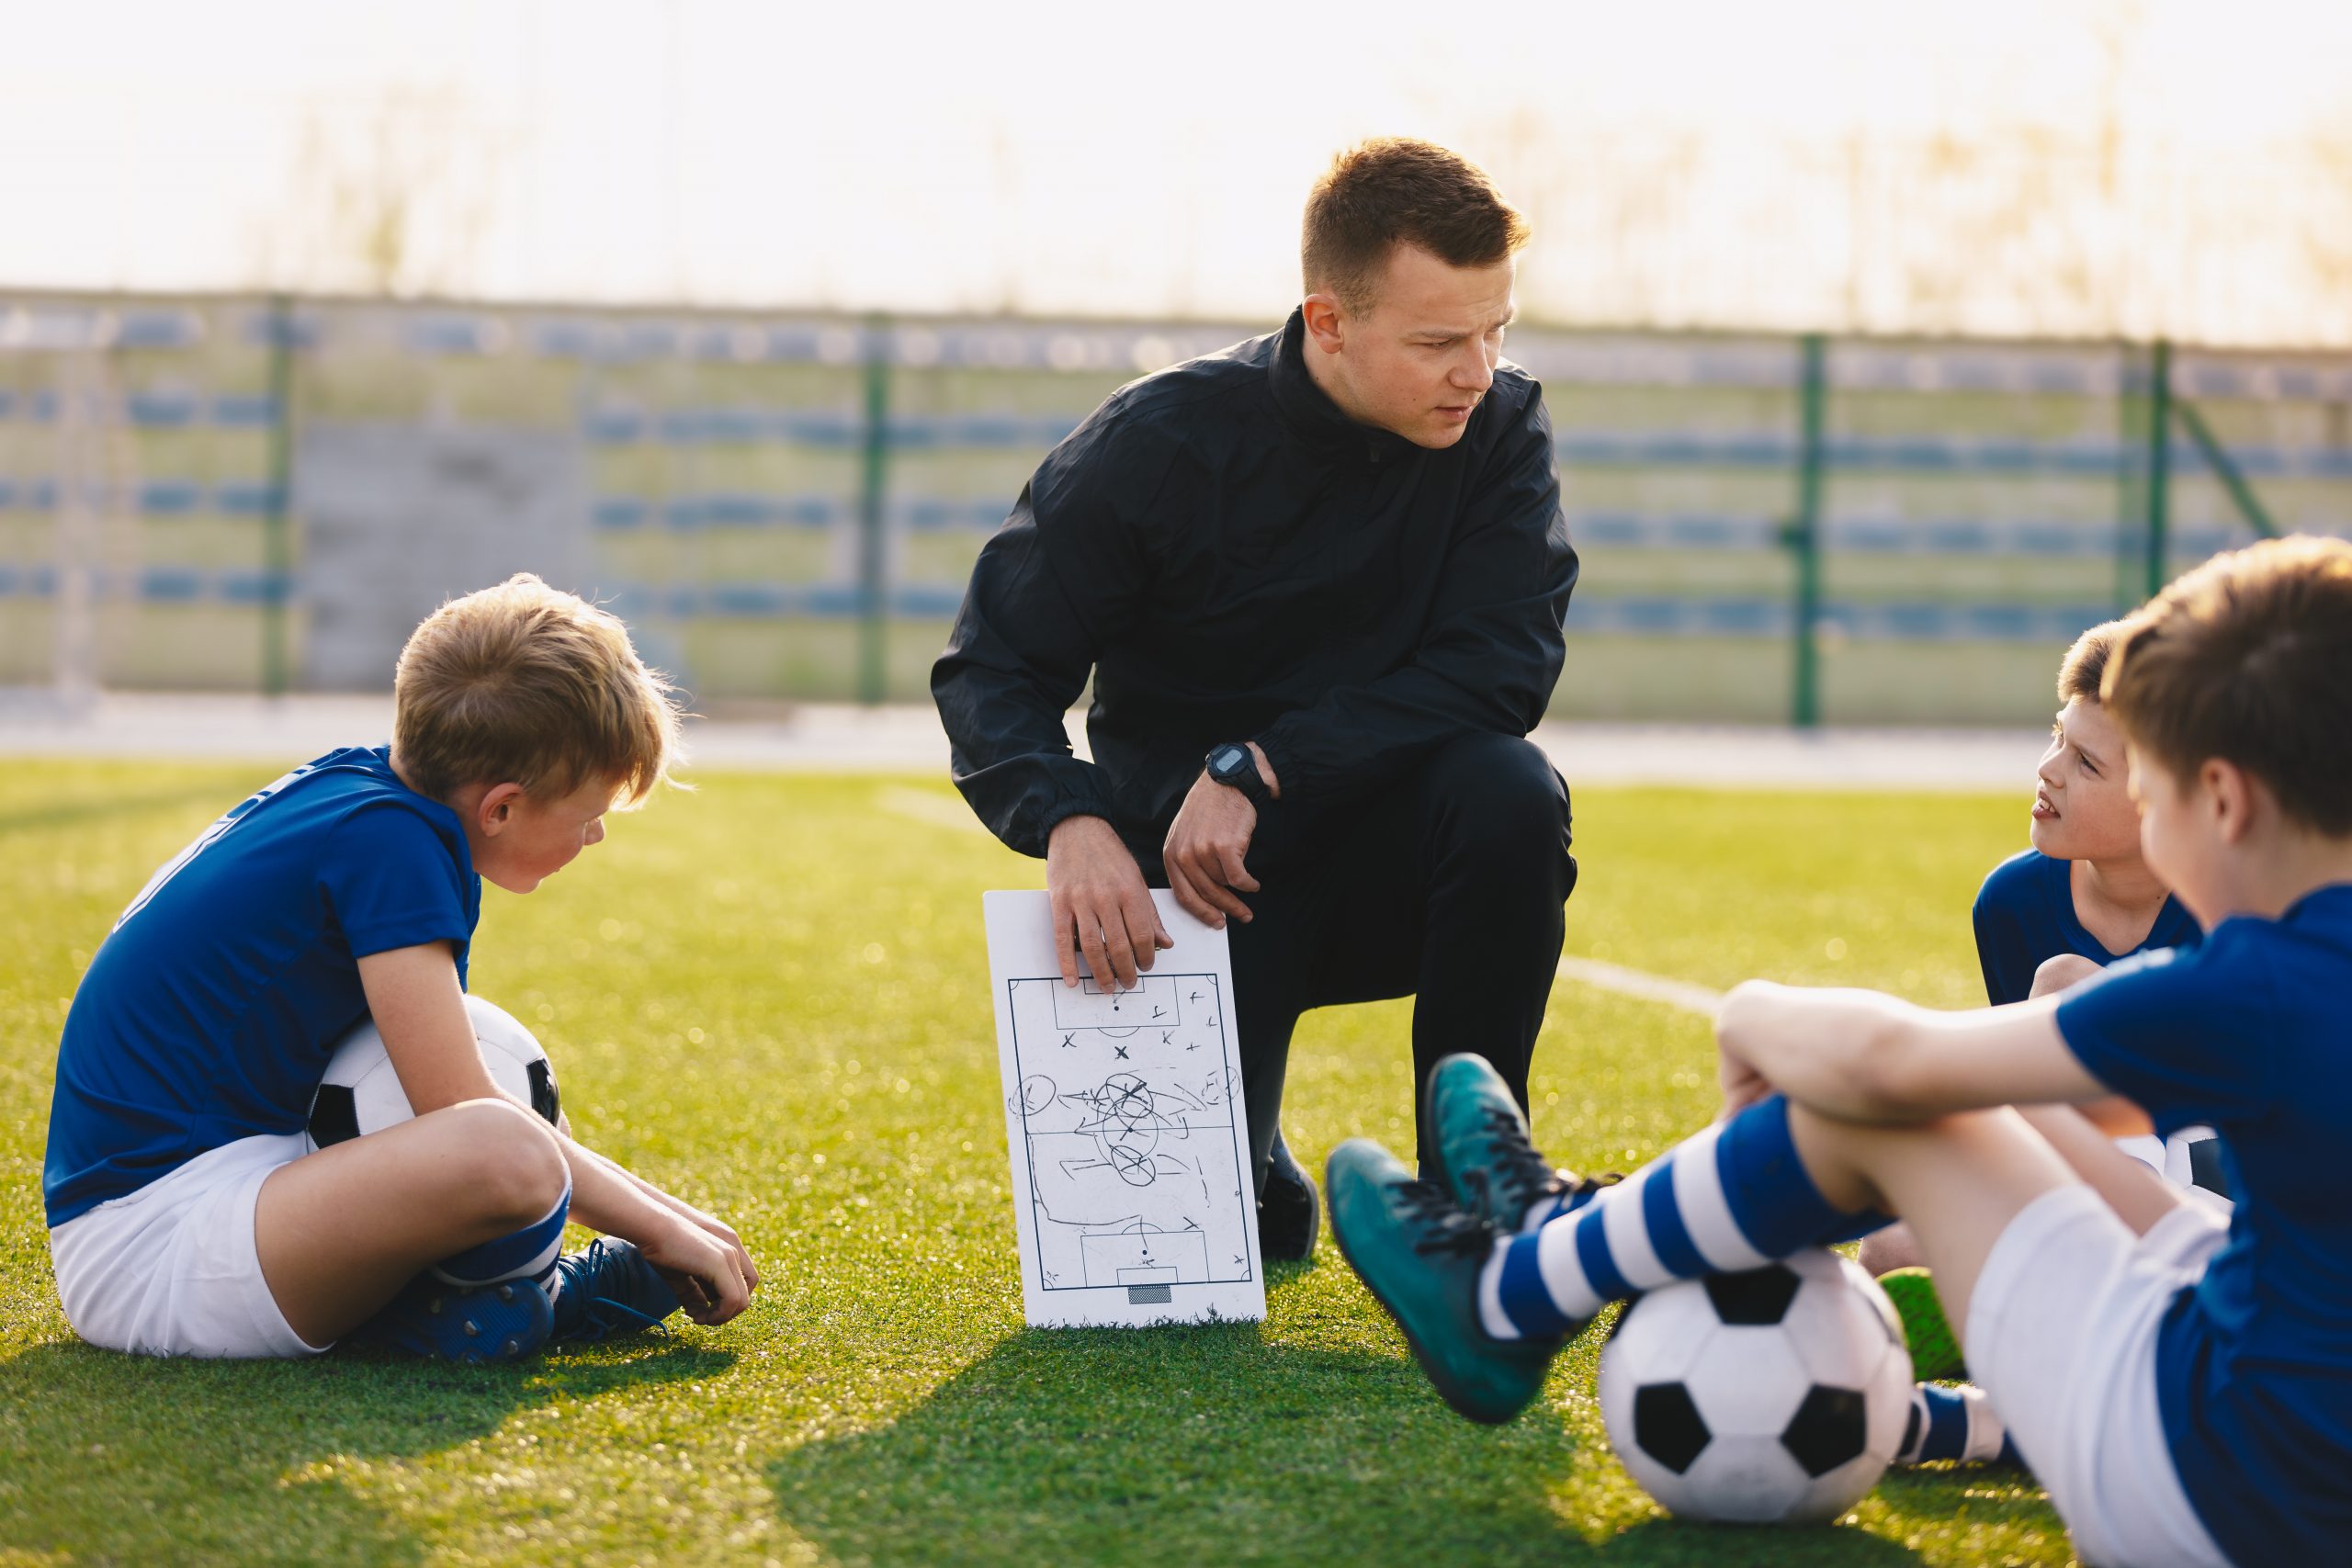 Football coach coaching children. Soccer football training session for children. Young coach teaching kids on football field. Football tactic education. Coach explains the strategy of the game